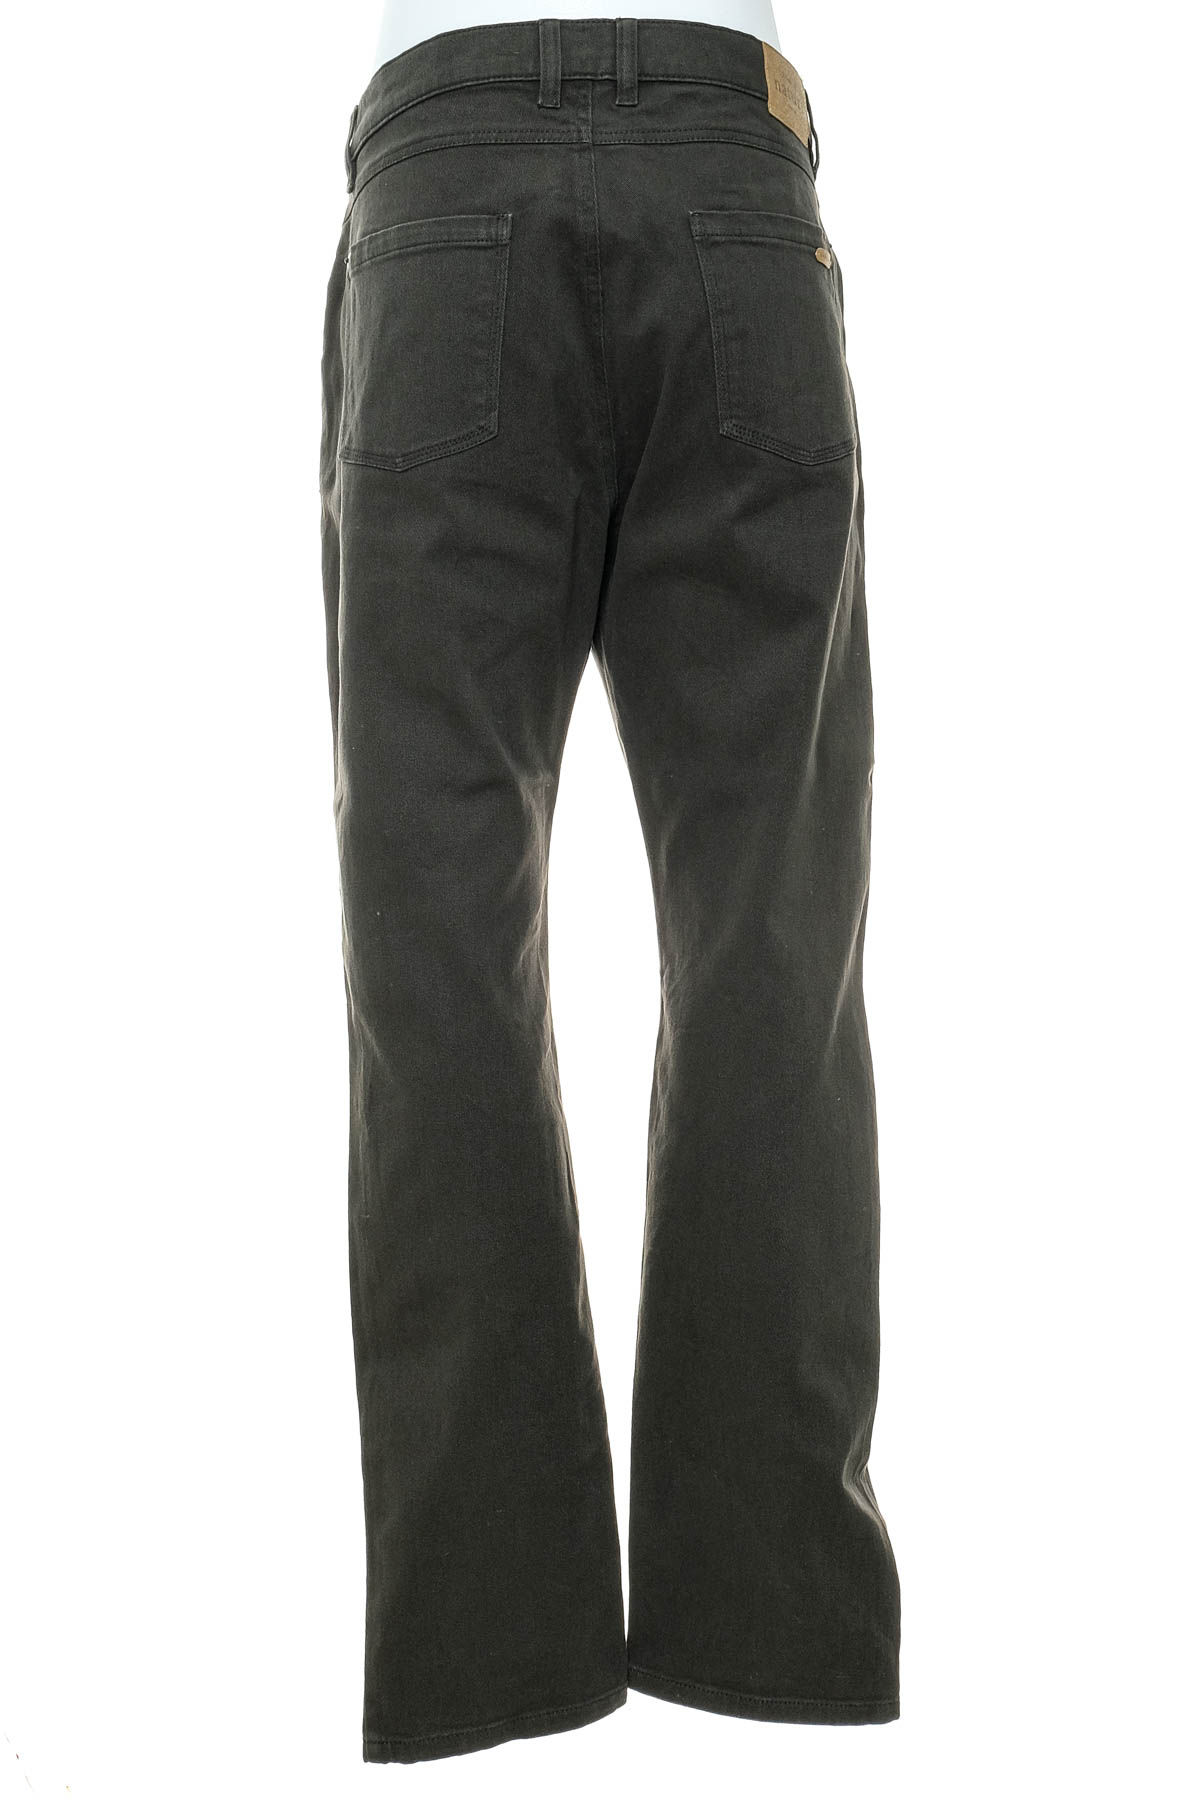 Men's trousers - Living Crafts - 1